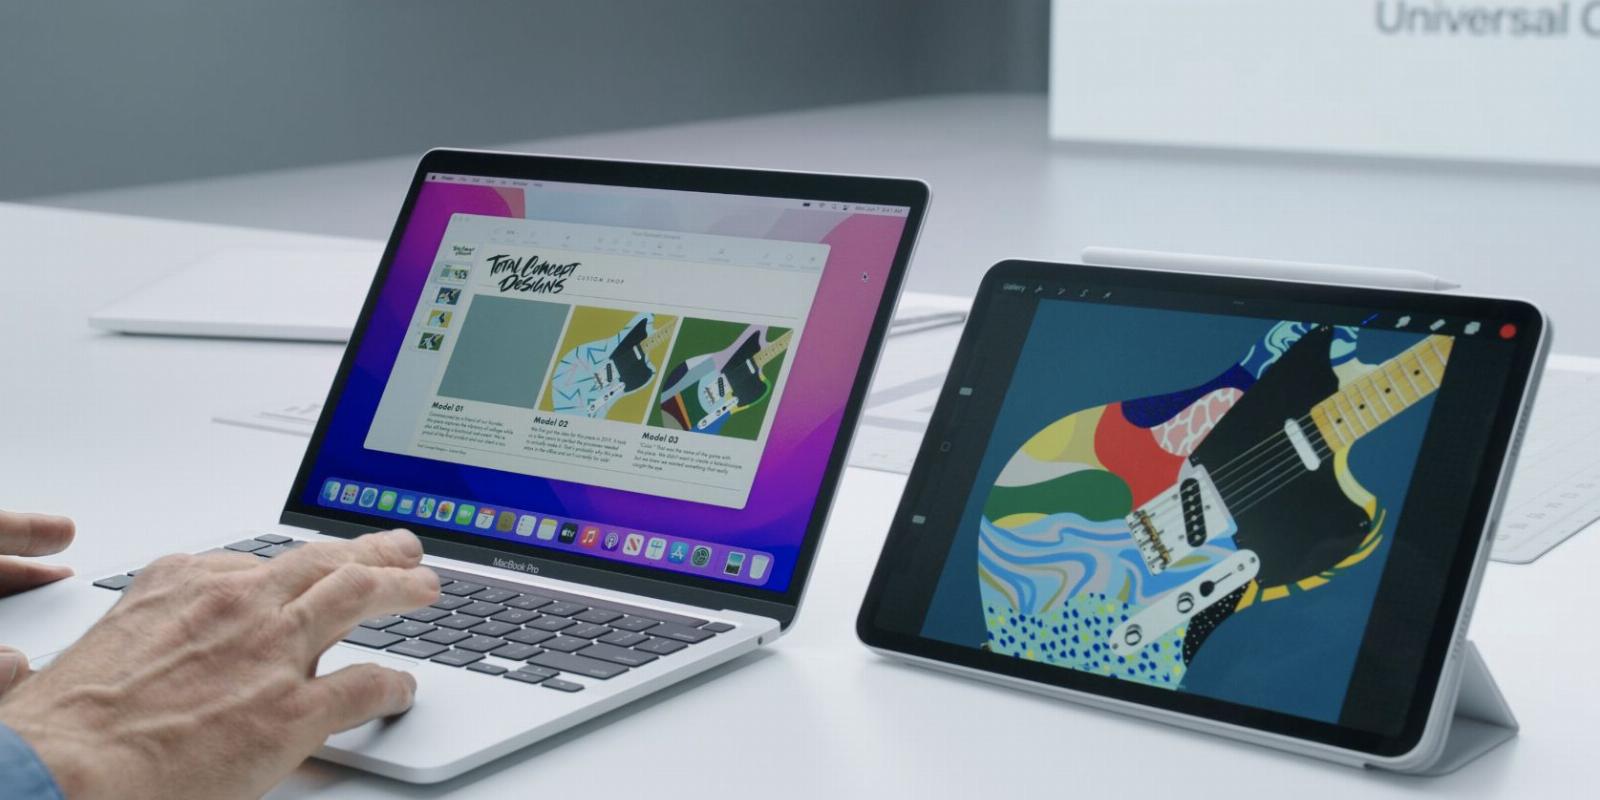 5 Essential Tips for Using Universal Control With Your Mac and iPad